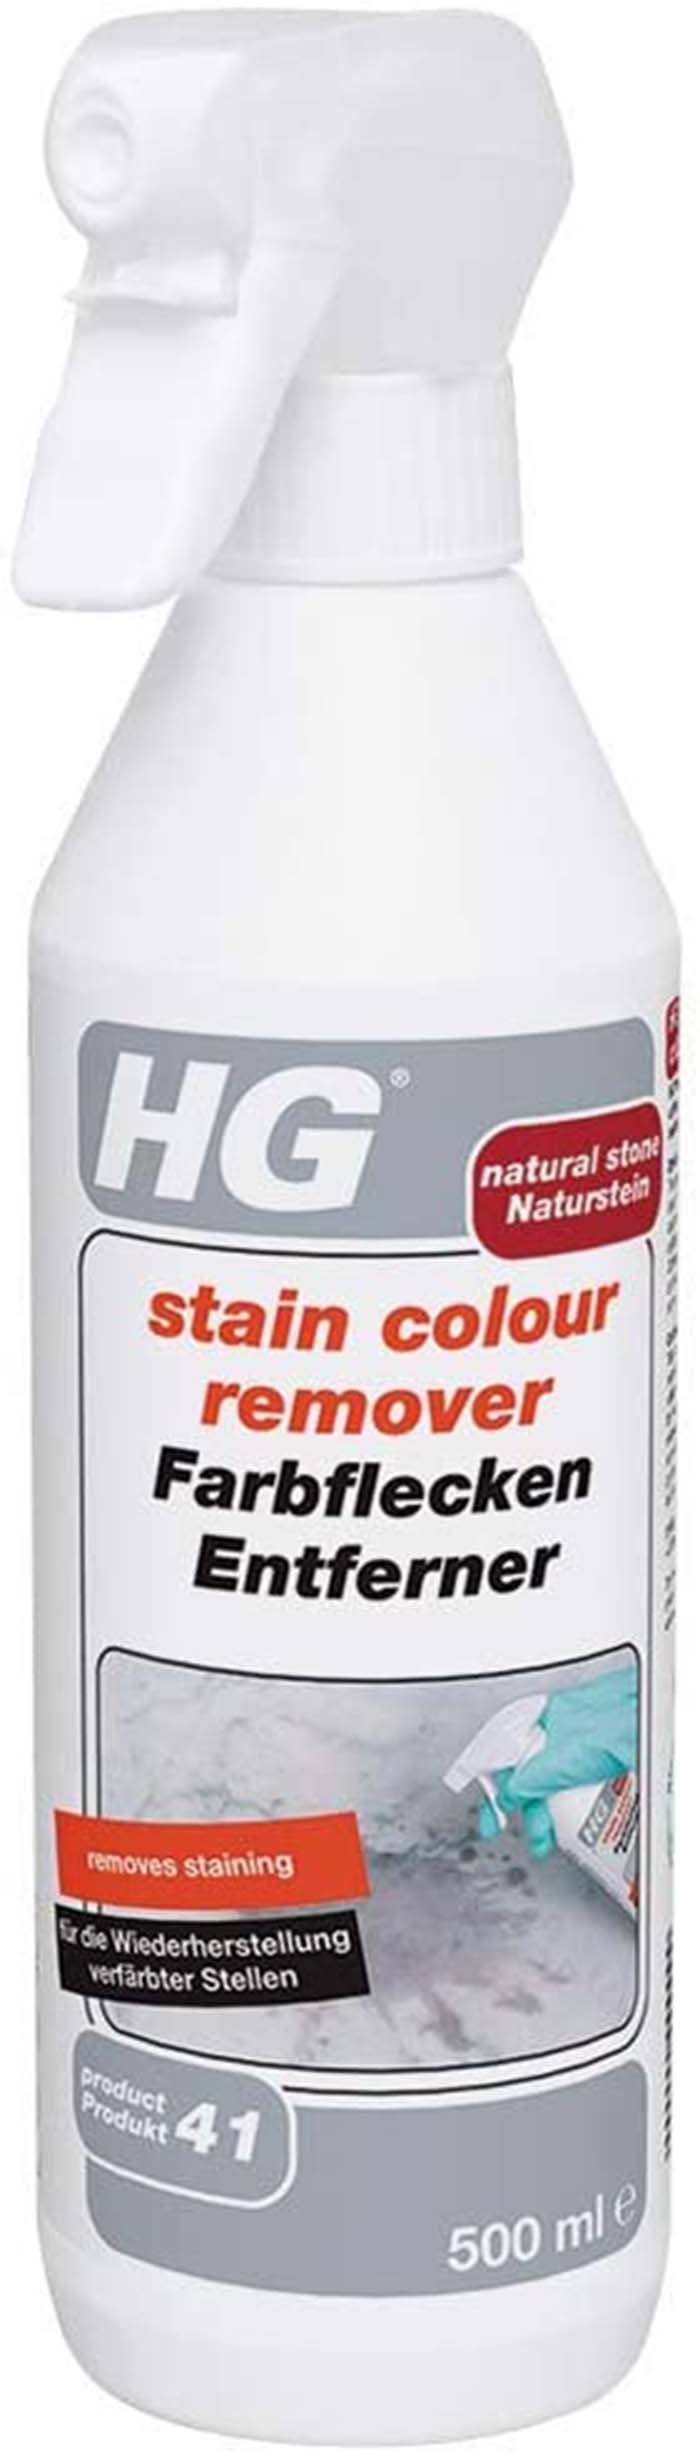 HG MARBLE STAIN COLOUR REMOVER  500ML